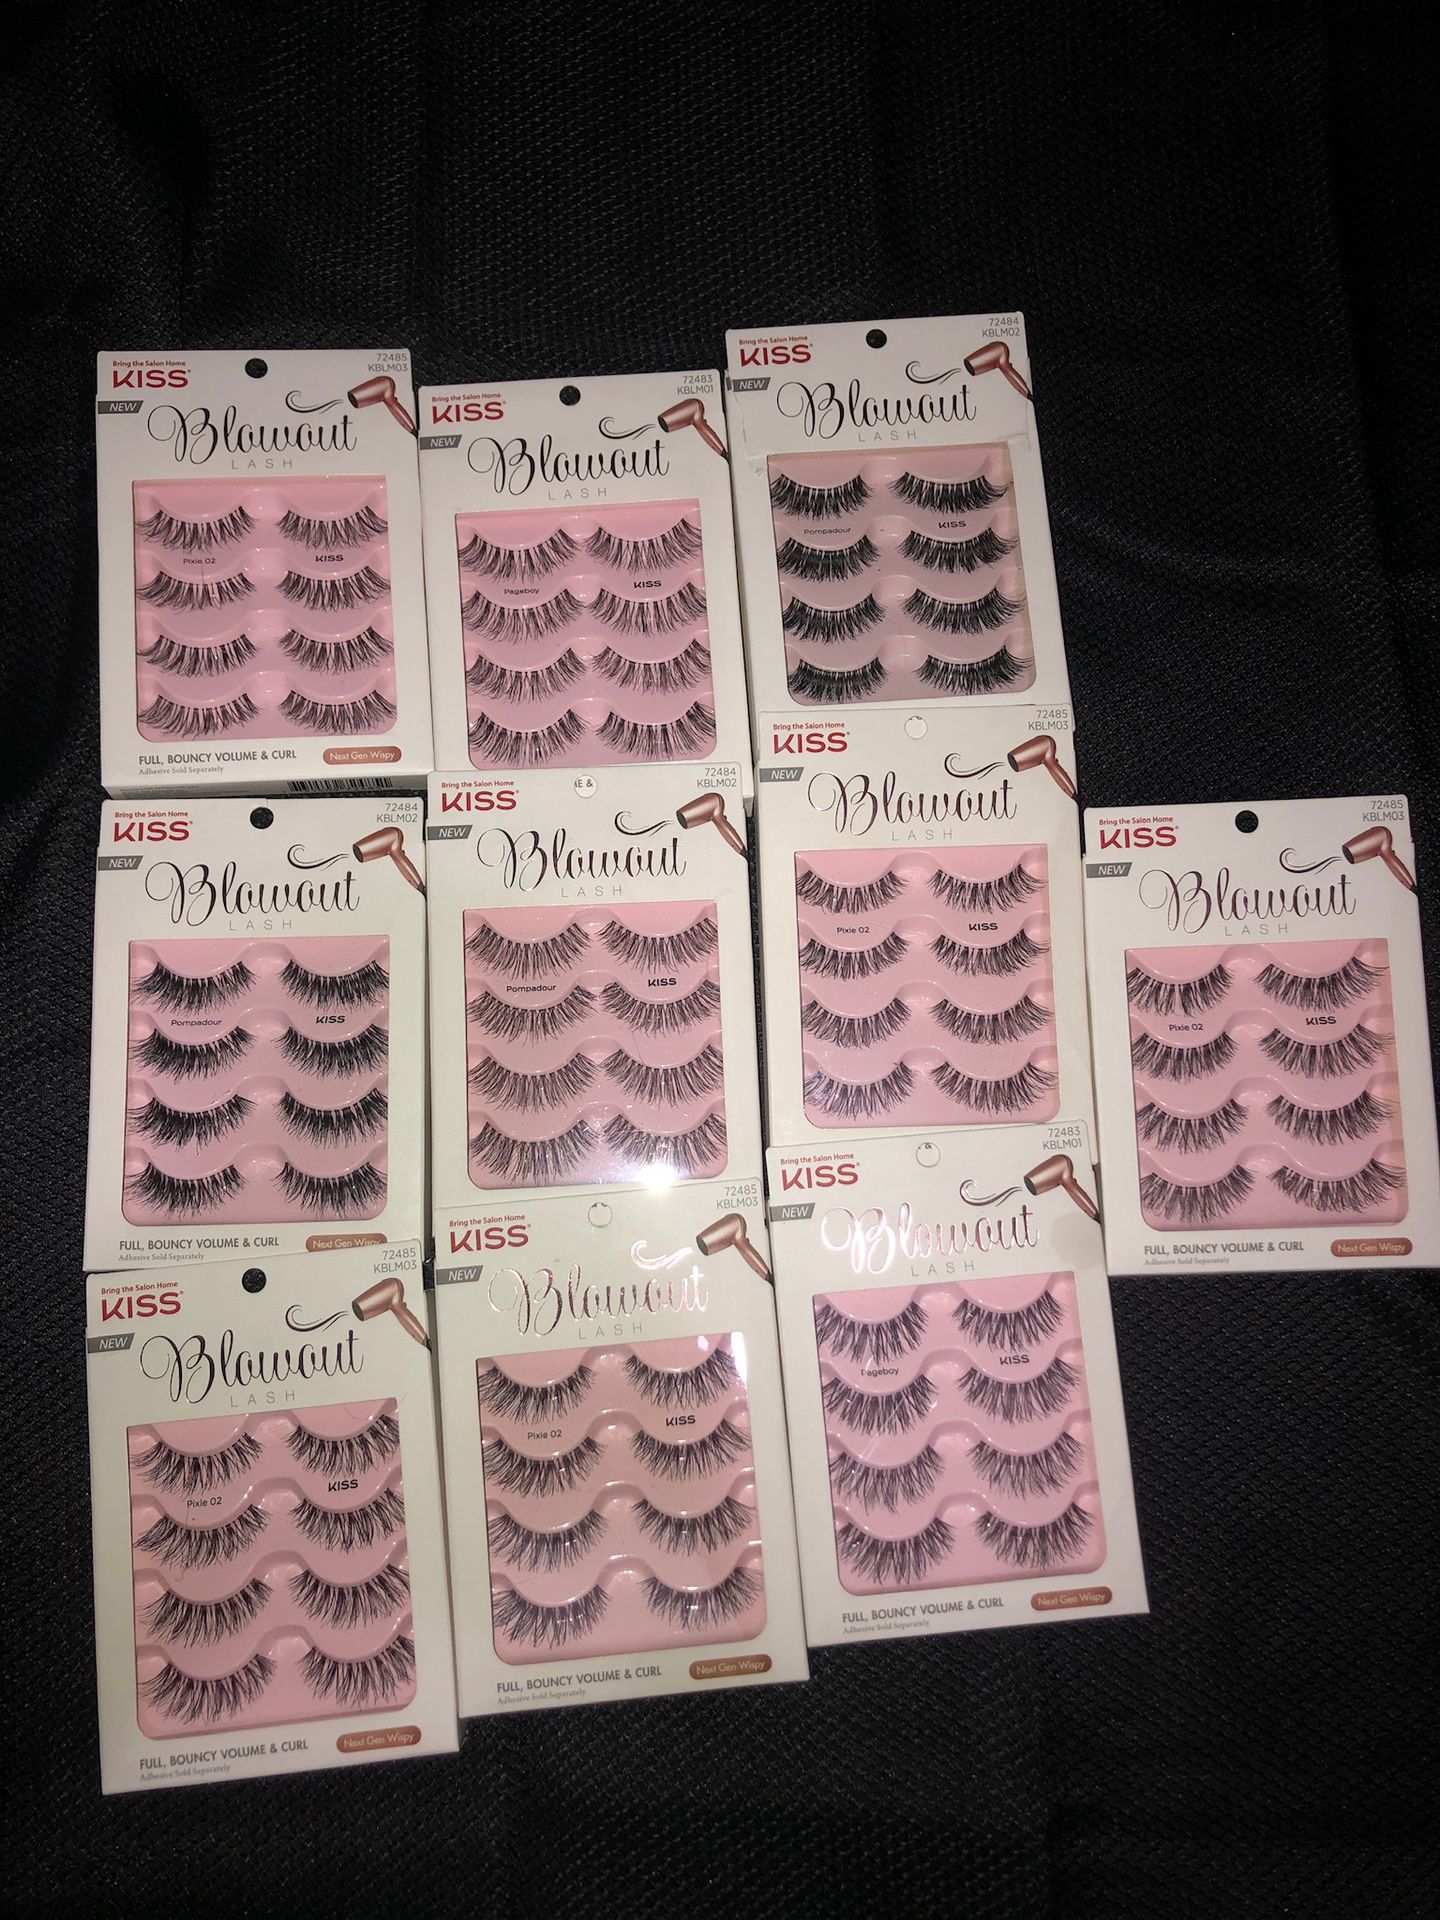 MAKEUP LASHES & more!!